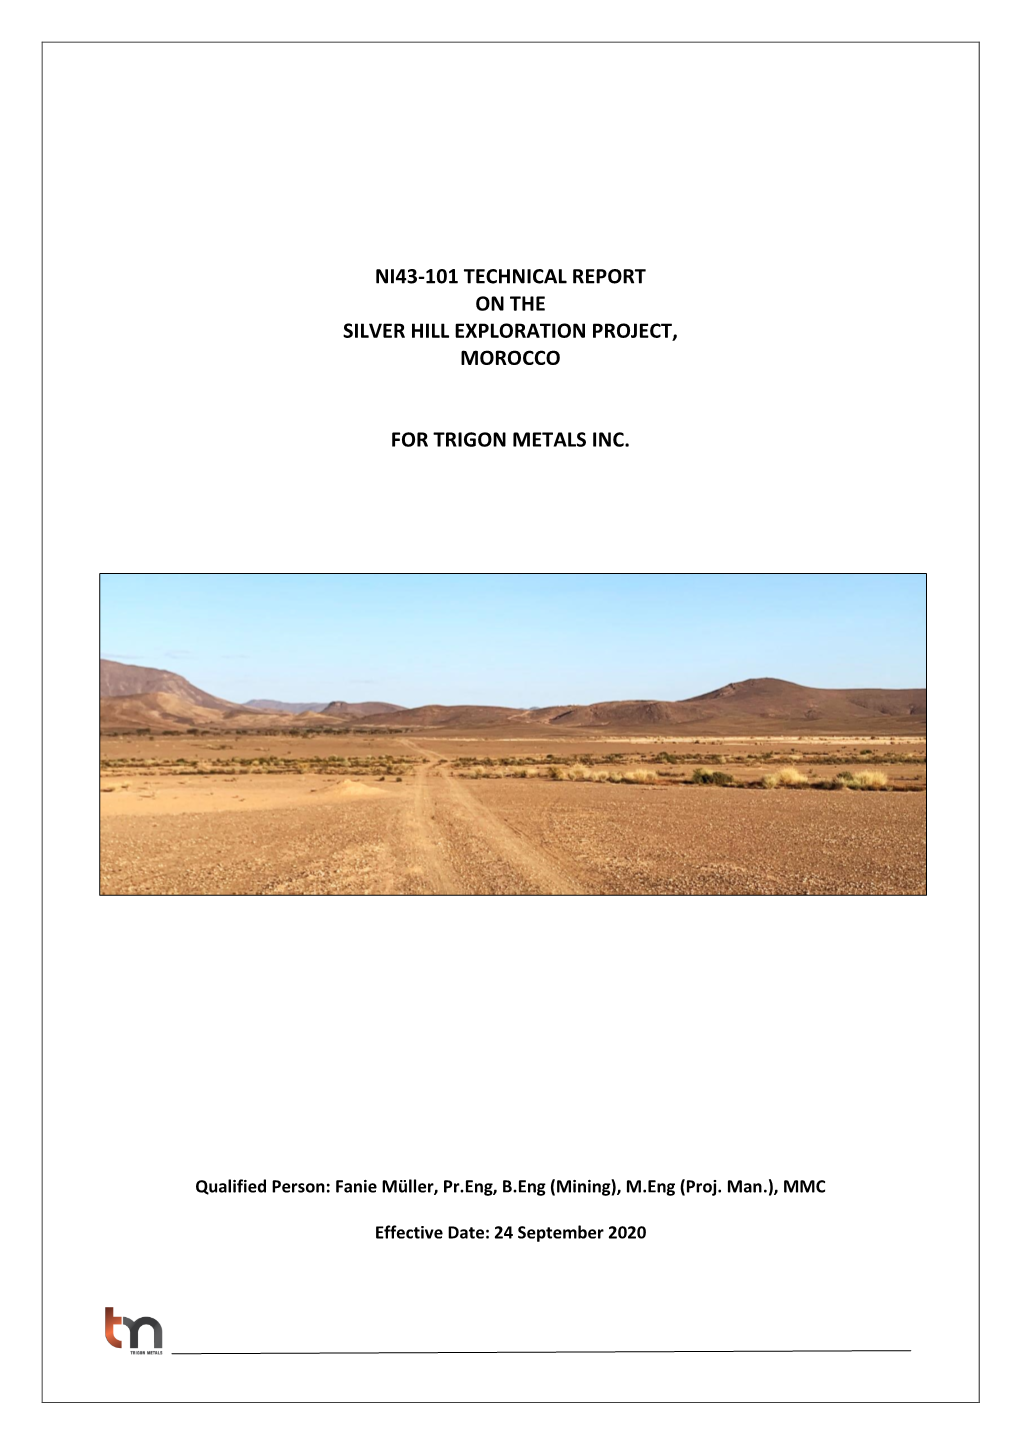 NI43-101 Technical Report on the Silver Hill Copper and Silver Project, Morocco 32